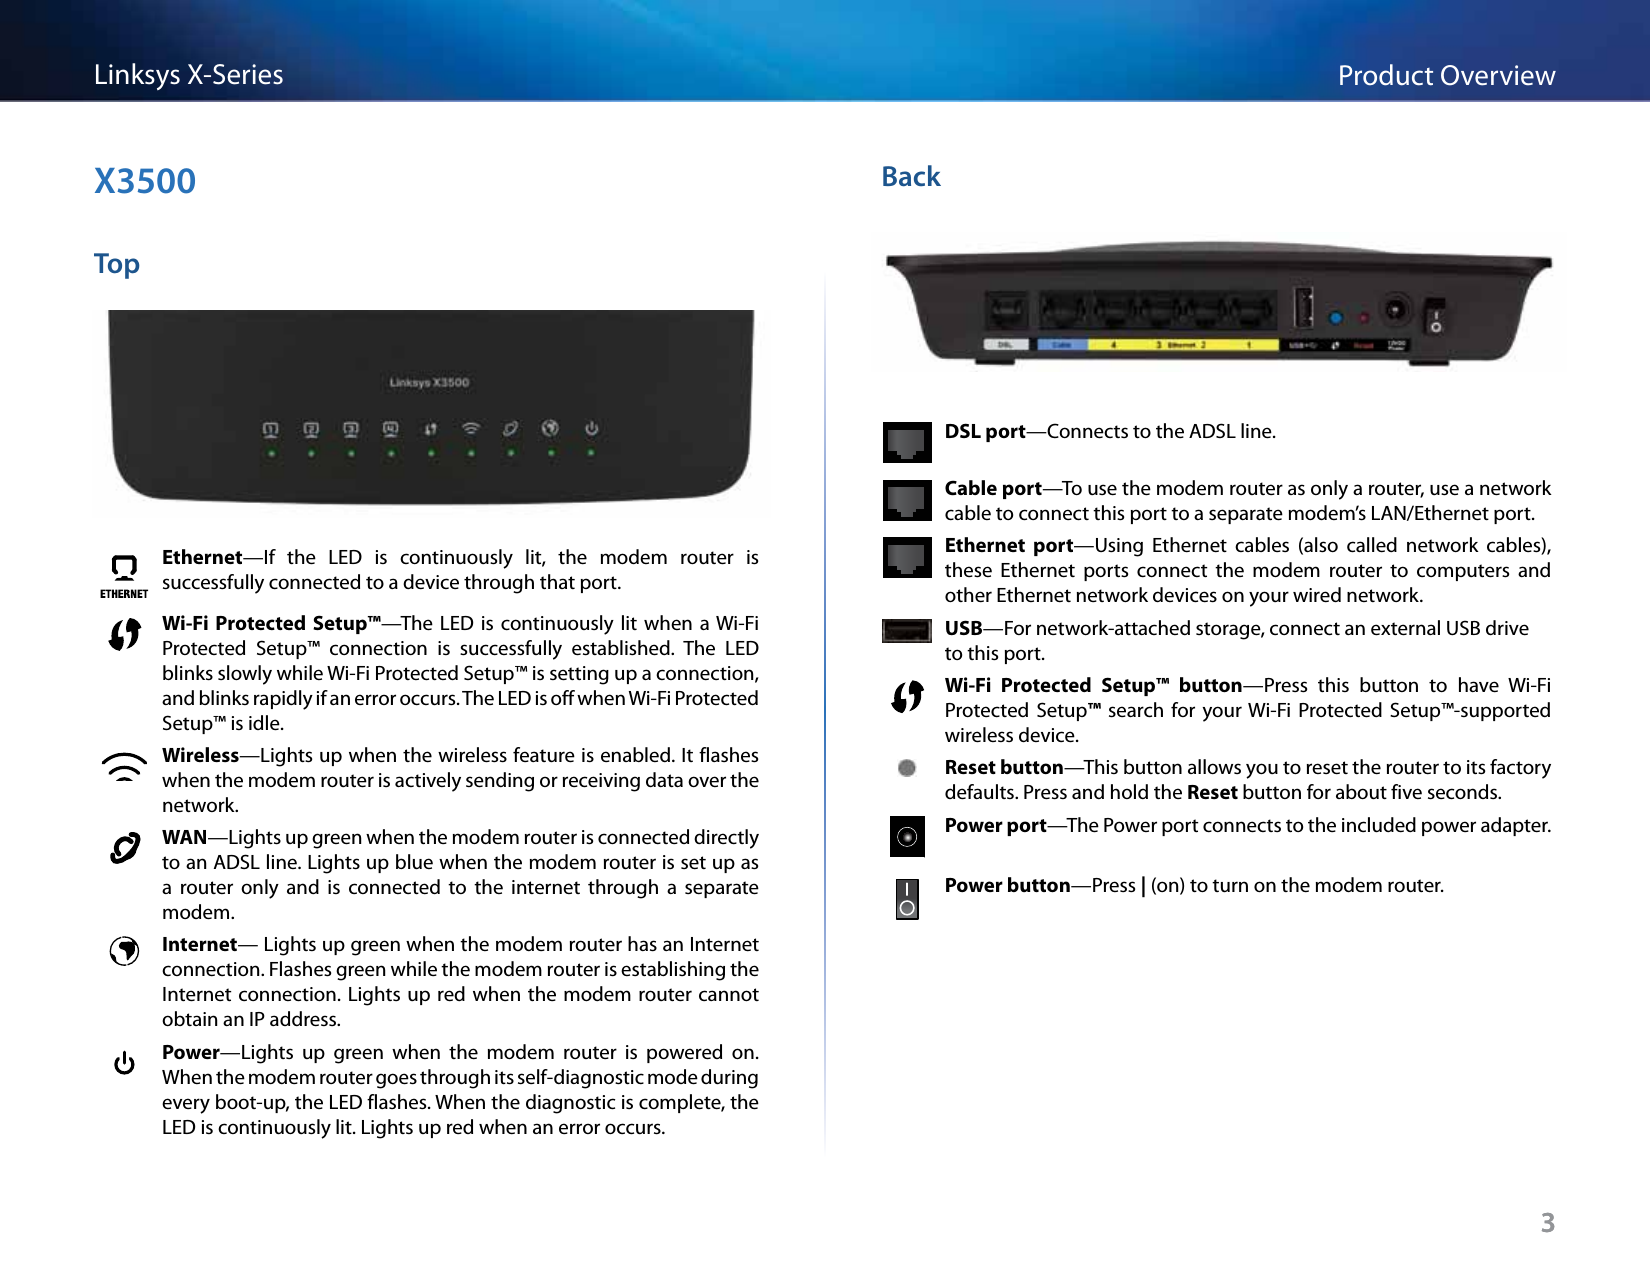 3Product OverviewLinksys X-Series3X3500TopEthernet—If  the  LED  is  continuously  lit,  the  modem  router  is successfully connected to a device through that port.Wi-Fi Protected  Setup™—The LED is  continuously lit  when  a Wi-Fi Protected  Setup™  connection  is  successfully  established.  The  LED blinks slowly while Wi-Fi Protected Setup™ is setting up a connection, and blinks rapidly if an error occurs. The LED is off when Wi-Fi Protected Setup™ is idle.Wireless—Lights up when the wireless feature is enabled. It flashes when the modem router is actively sending or receiving data over the network.WAN—Lights up green when the modem router is connected directly to an ADSL line. Lights up blue when the modem router is set up as a  router  only  and  is  connected  to  the  internet  through  a  separate modem.Internet— Lights up green when the modem router has an Internet connection. Flashes green while the modem router is establishing the Internet connection. Lights up red when the  modem router cannot obtain an IP address.Power—Lights  up  green  when  the  modem  router  is  powered  on. When the modem router goes through its self-diagnostic mode during every boot-up, the LED flashes. When the diagnostic is complete, the LED is continuously lit. Lights up red when an error occurs. BackDSL port—Connects to the ADSL line.Cable port—To use the modem router as only a router, use a network cable to connect this port to a separate modem’s LAN/Ethernet port.Ethernet  port—Using  Ethernet  cables  (also  called  network  cables), these  Ethernet  ports  connect  the  modem  router  to  computers  and other Ethernet network devices on your wired network.USB—For network-attached storage, connect an external USB drive to this port.Wi-Fi  Protected  Setup™  button—Press  this  button  to  have  Wi-Fi Protected  Setup™  search for  your Wi-Fi  Protected  Setup™-supported wireless device.Reset button—This button allows you to reset the router to its factory defaults. Press and hold the Reset button for about five seconds.Power port—The Power port connects to the included power adapter.Power button—Press | (on) to turn on the modem router. 